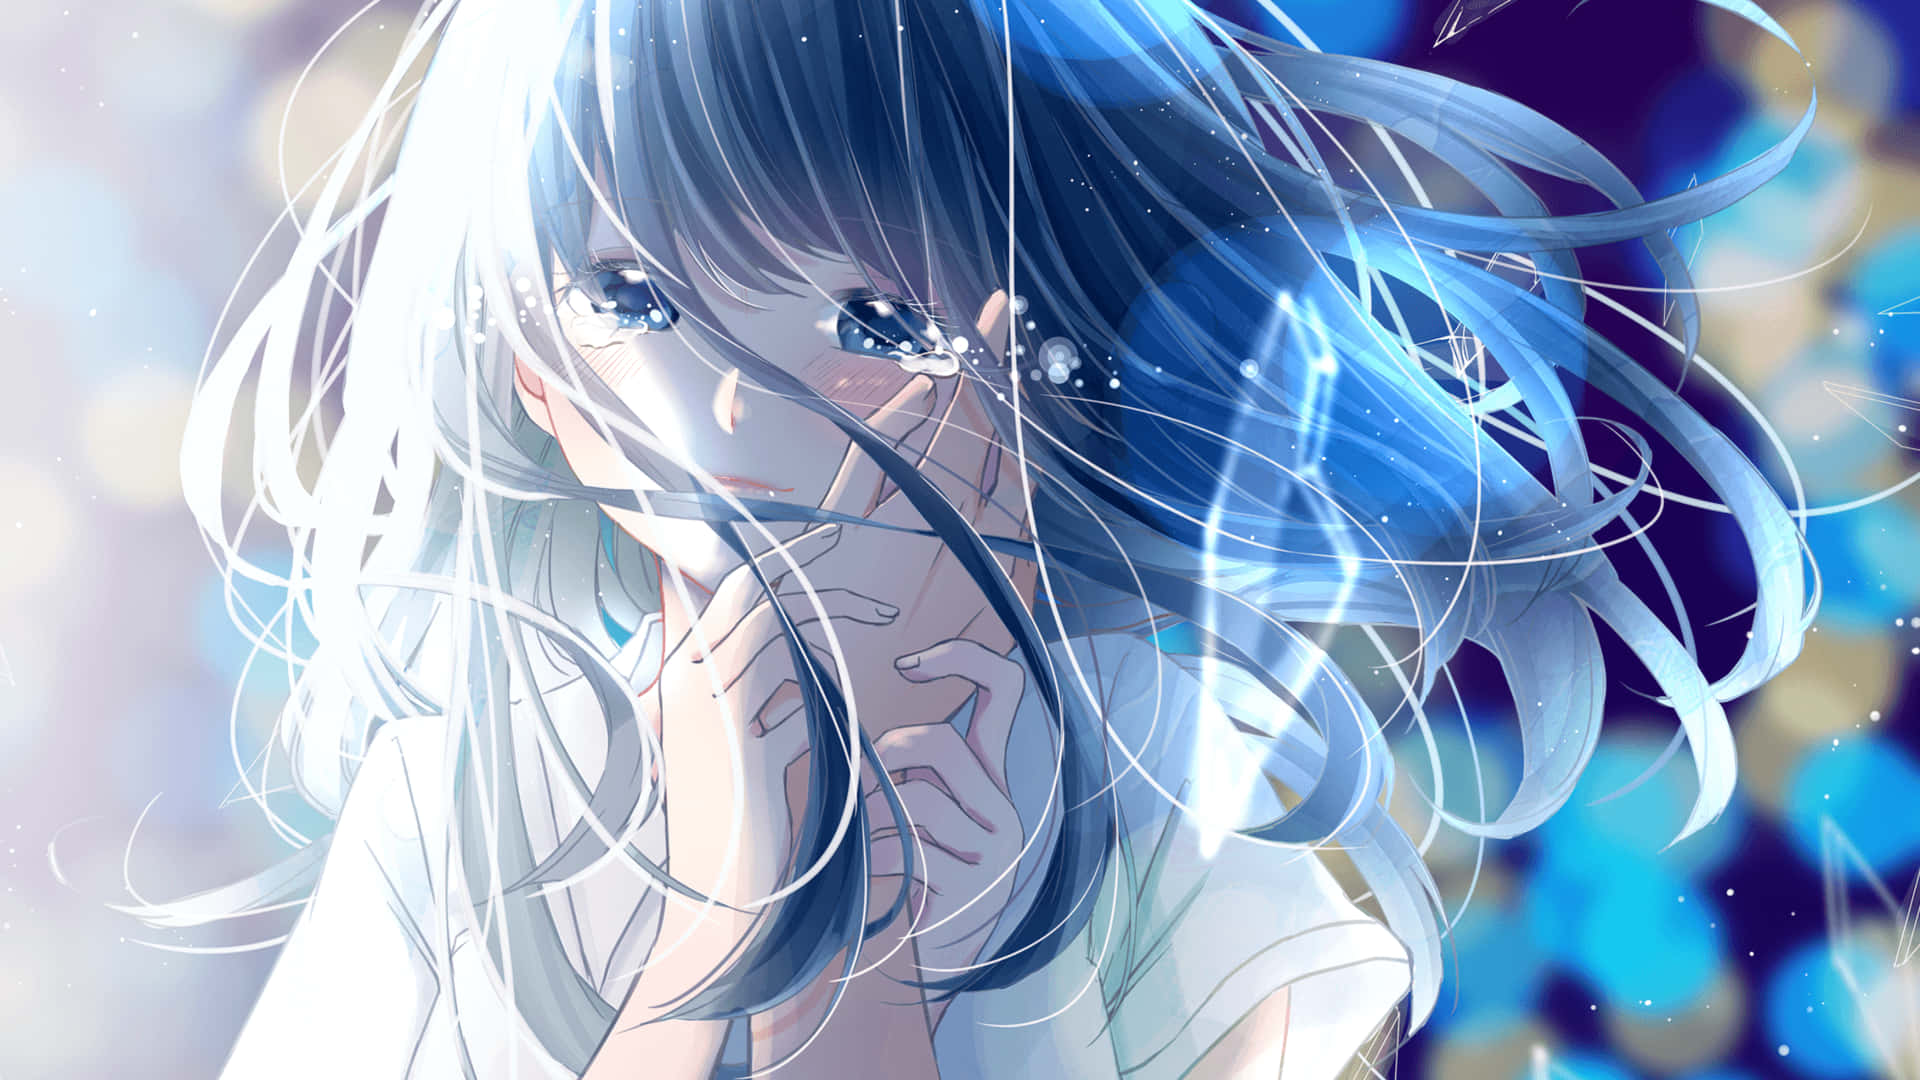 Sad anime girl crying out of loneliness. Wallpaper